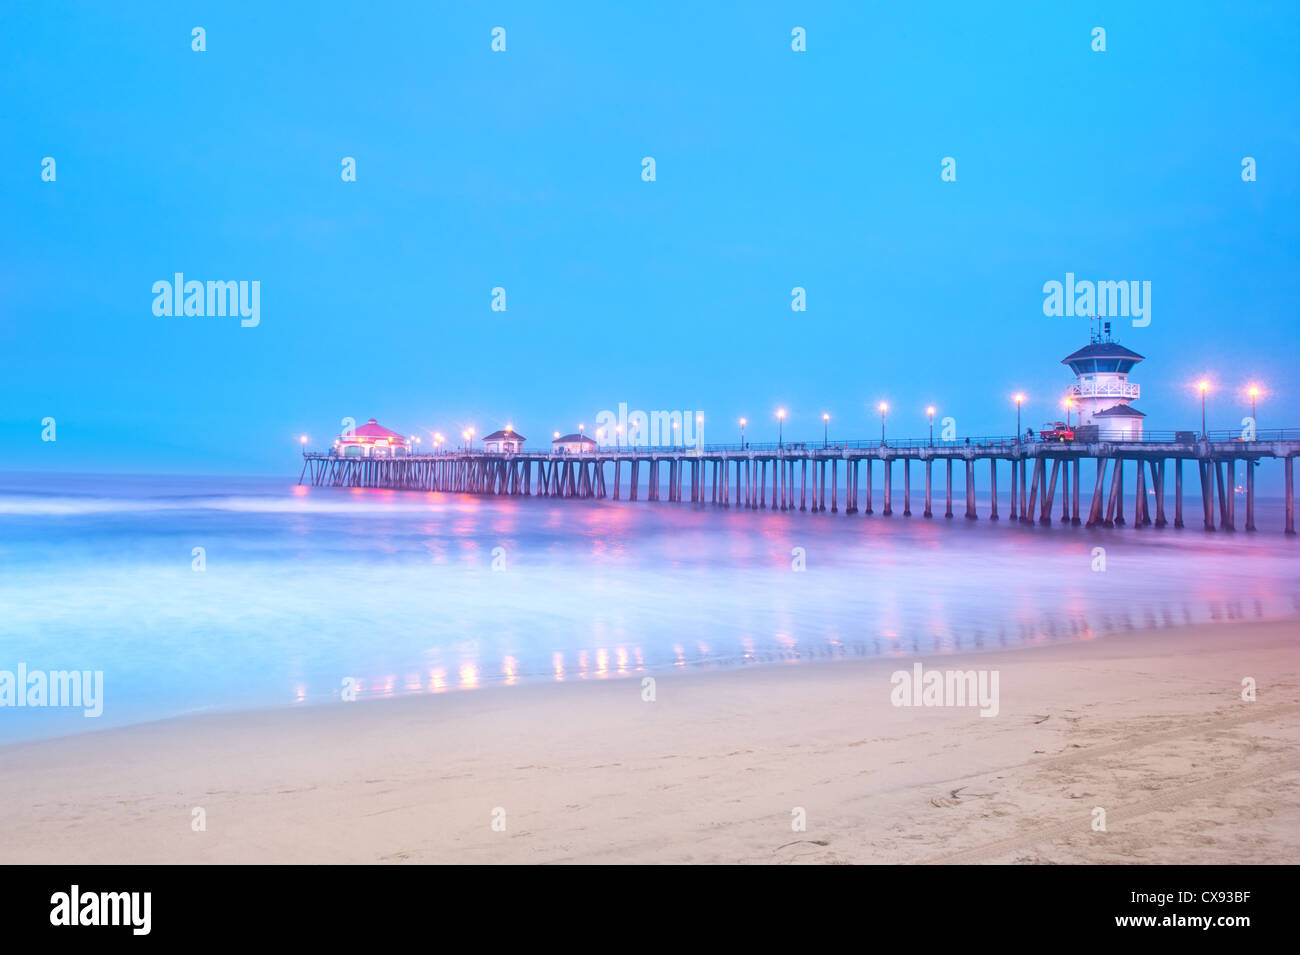 An early morning image of a pier in Huntington Beach, California Stock Photo